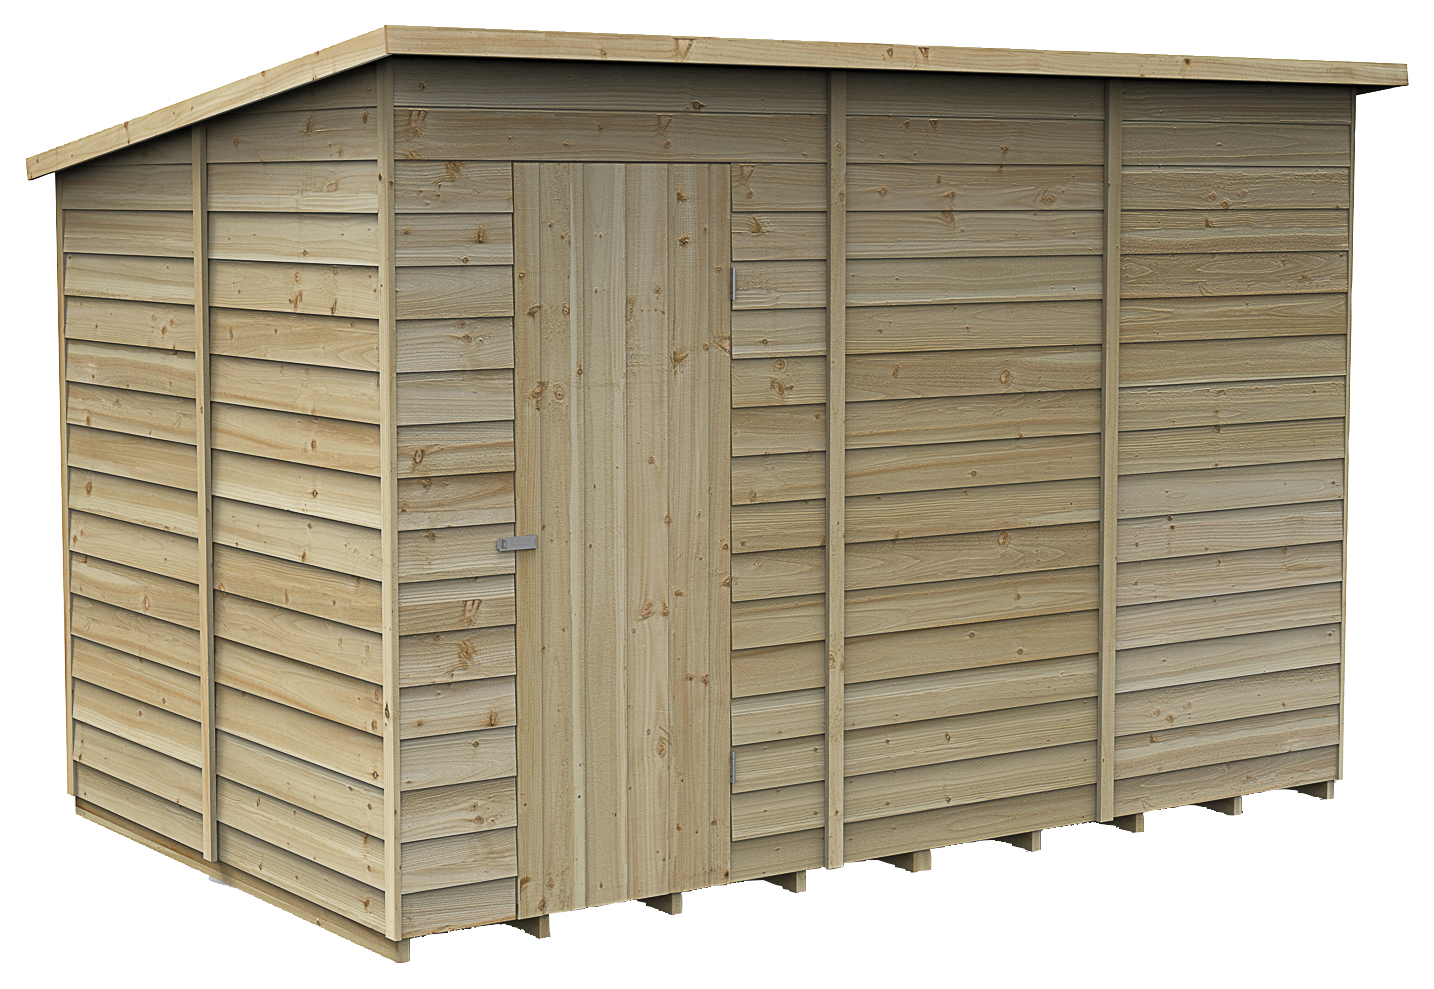 Forest Garden 10 x 6ft 4Life Pent Overlap Pressure Treated Windowless Shed with Base and Assembly